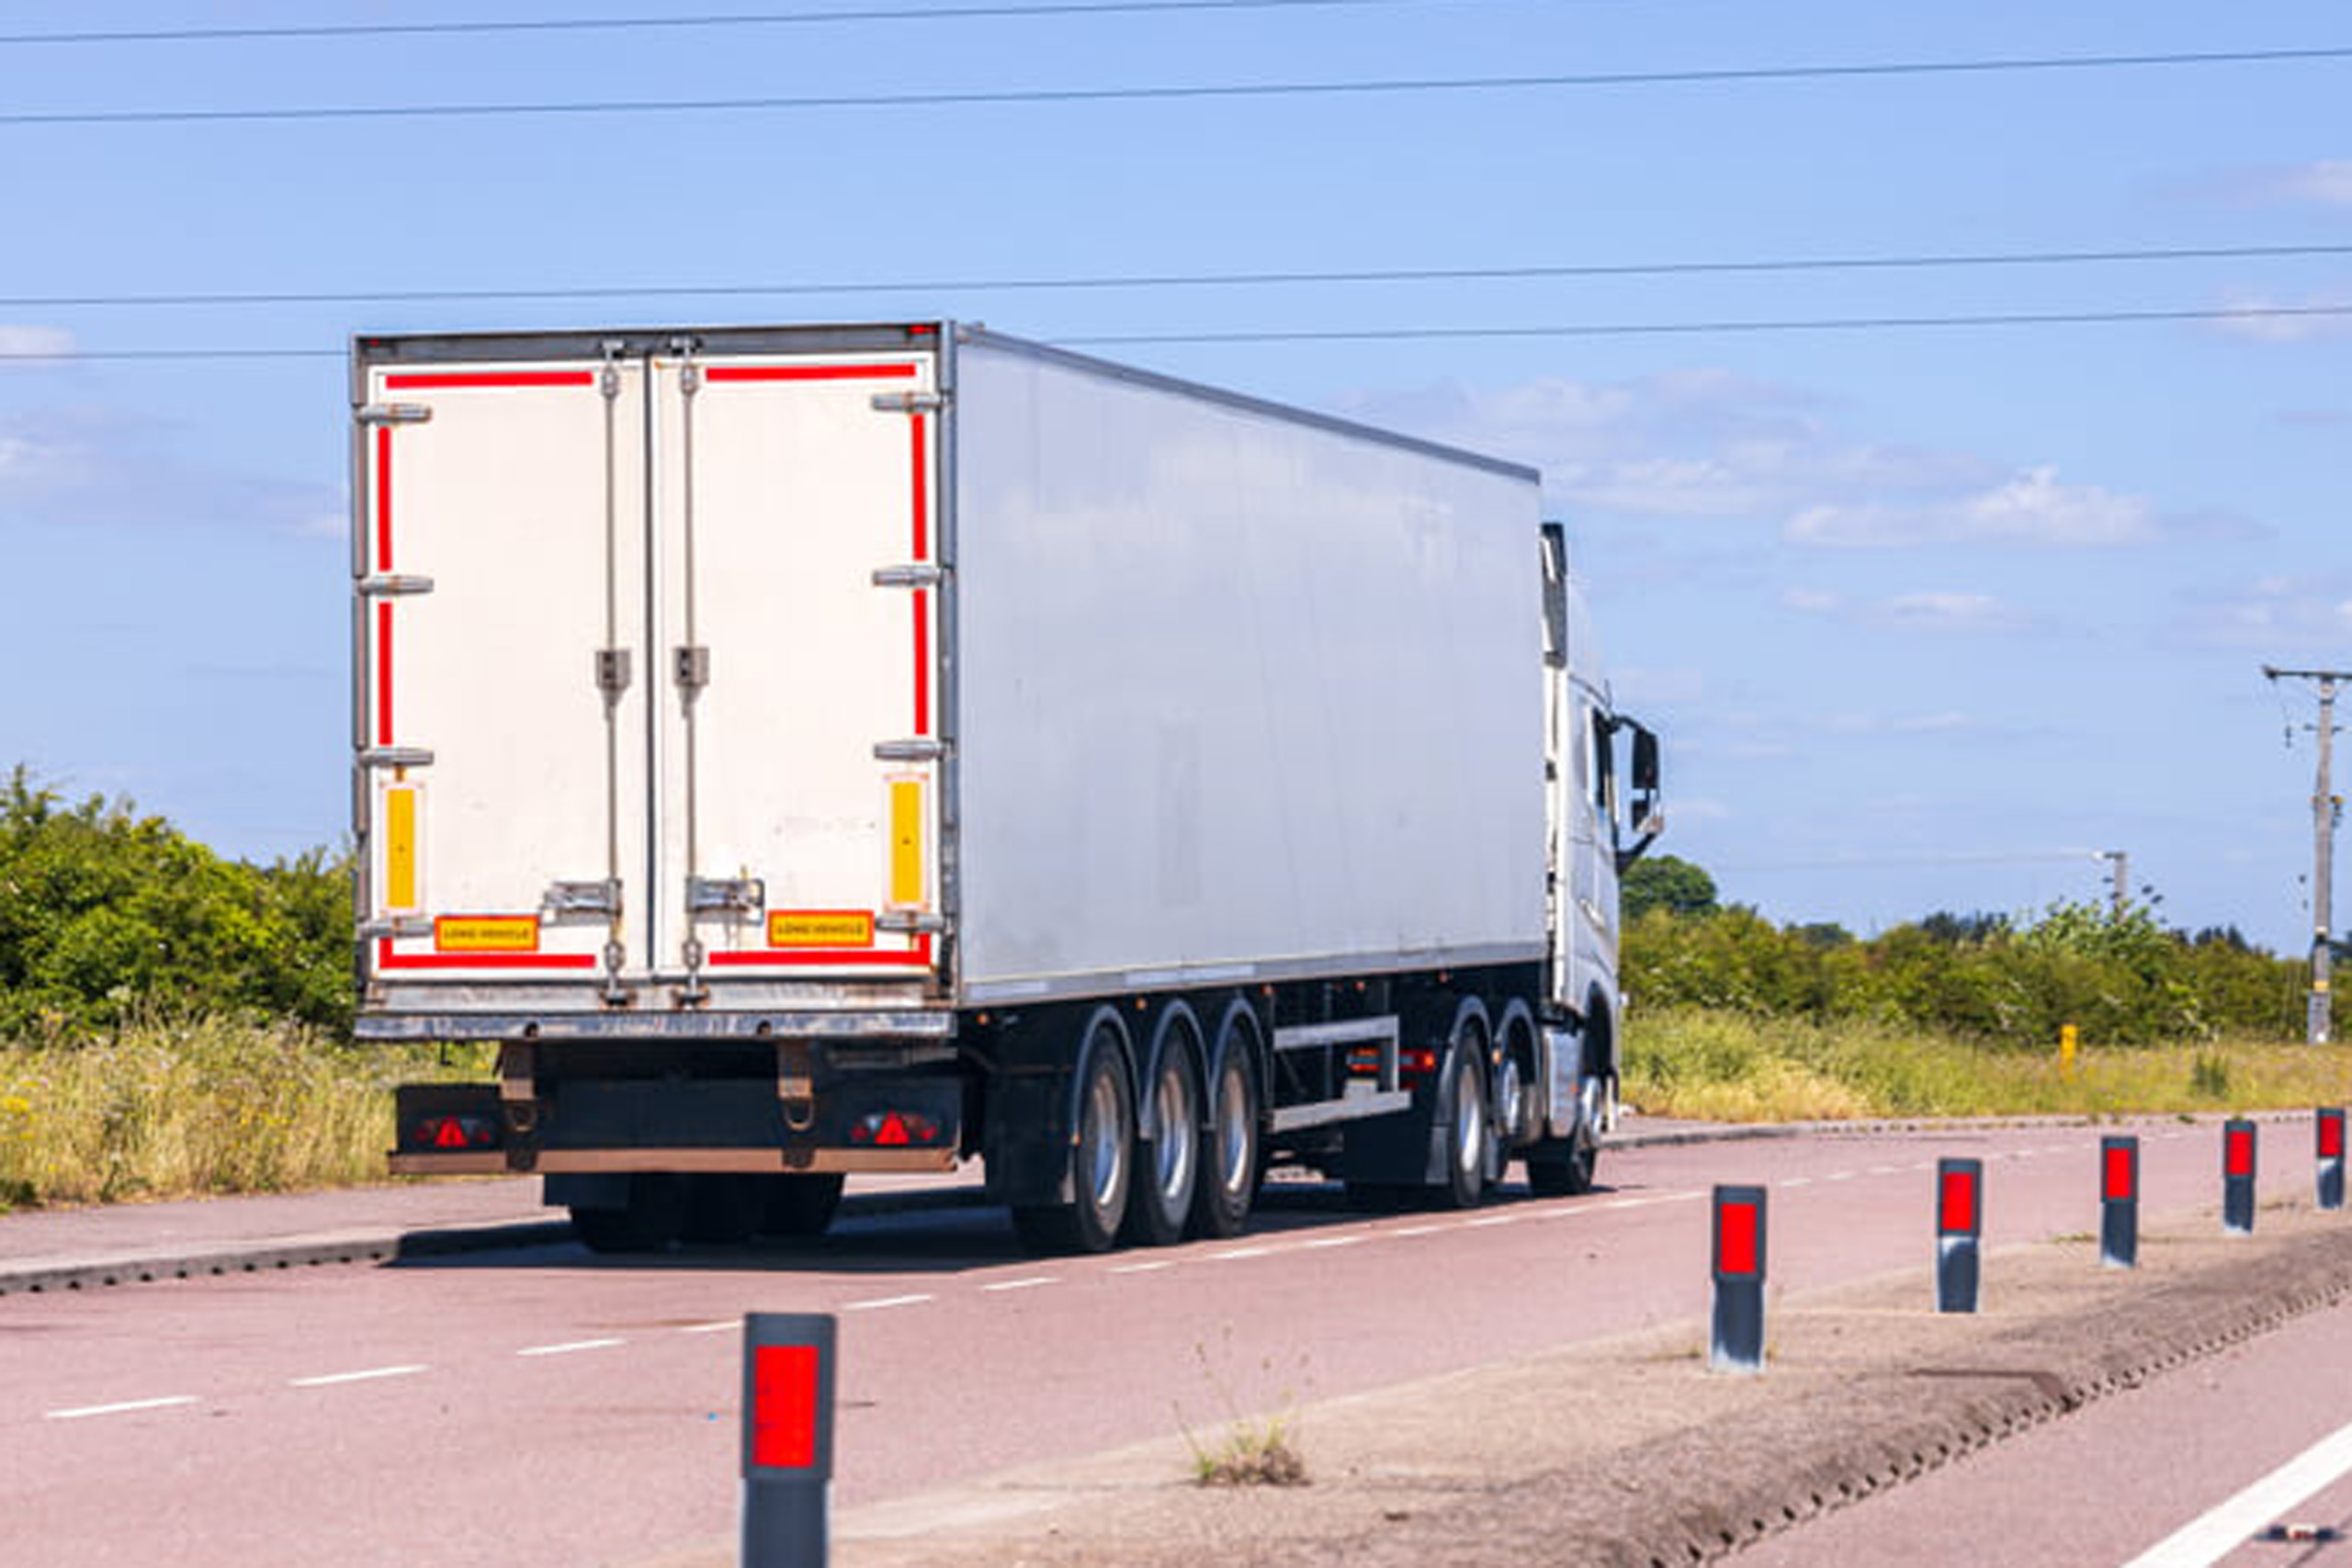 Drive Safely: 6 Tips for HGV Vehicle Safety